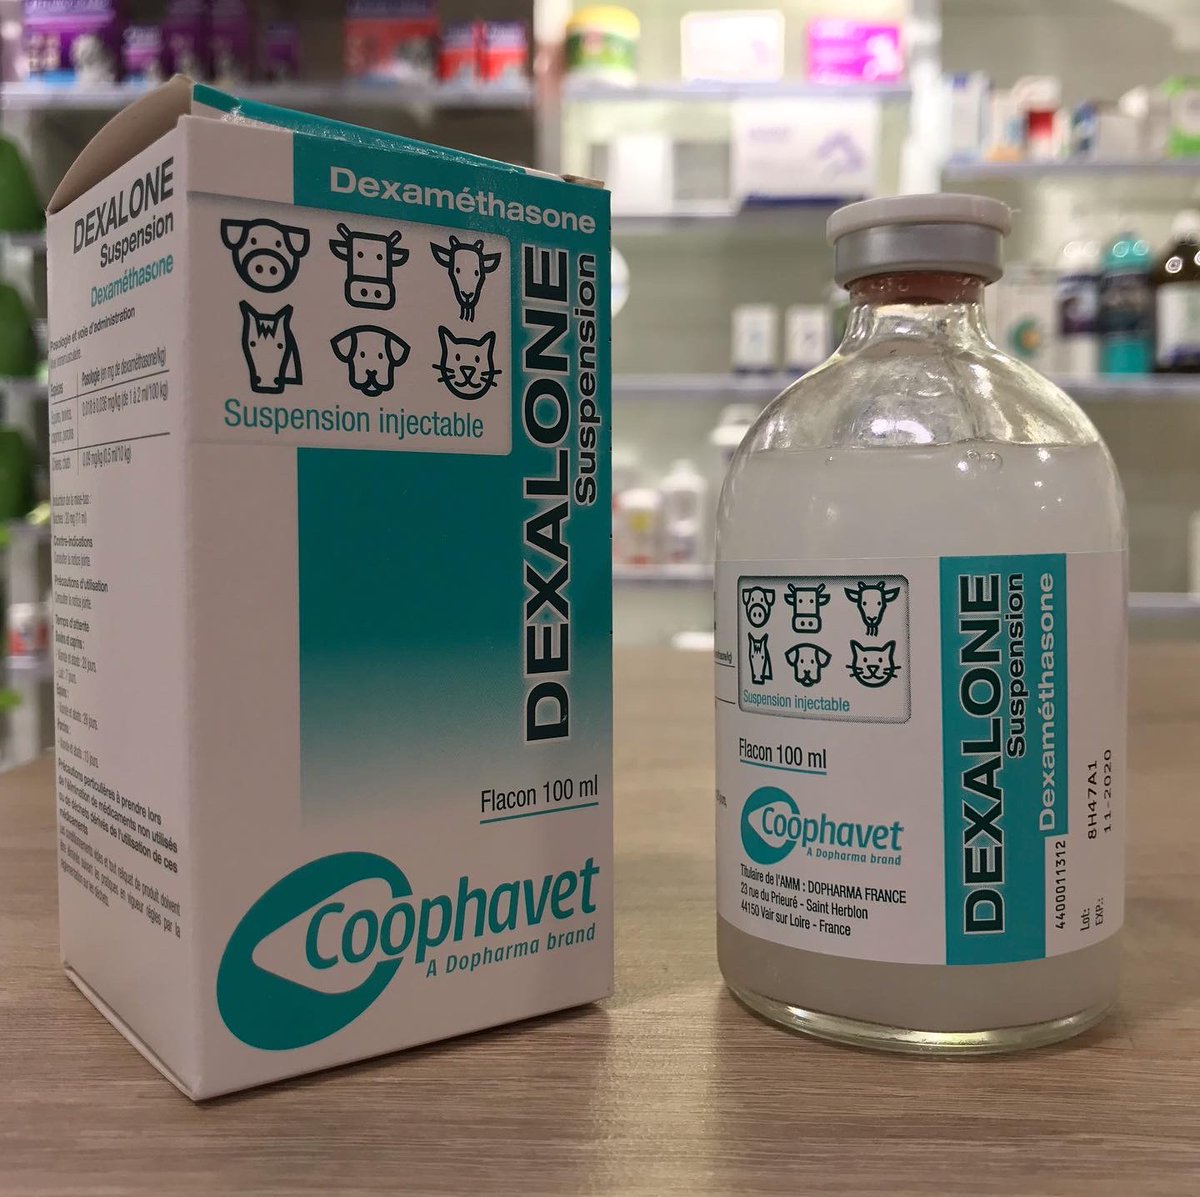 After more than 2 years of absence, Dexalone suspension is available again.
Our Dexalone is imported from FRANCE
 #Dubai #UAE #Cortamethasone #Horse #Camel #Camelracing #Horseracing #Dexamethasone #Dexalone #Pharmacy #Veterinarydrugs